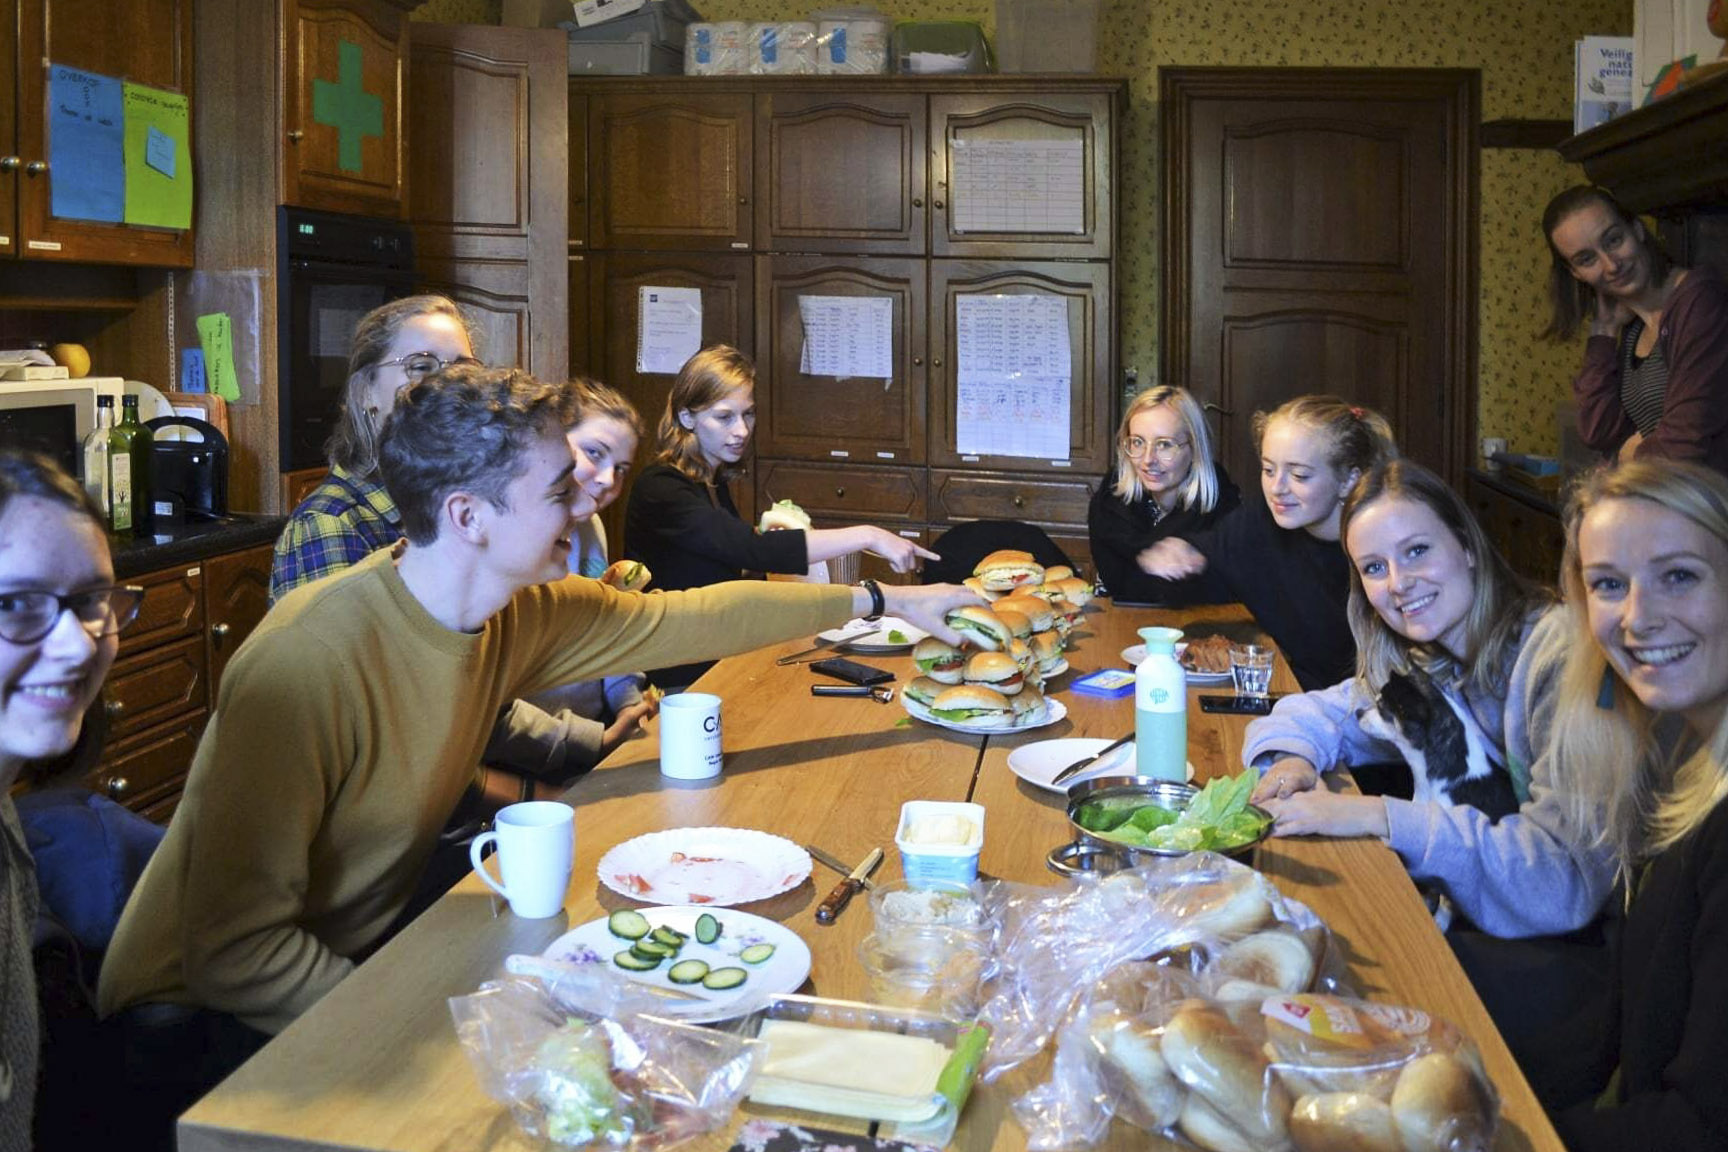 Group of friends gather around a table to make and eat sandwiches together